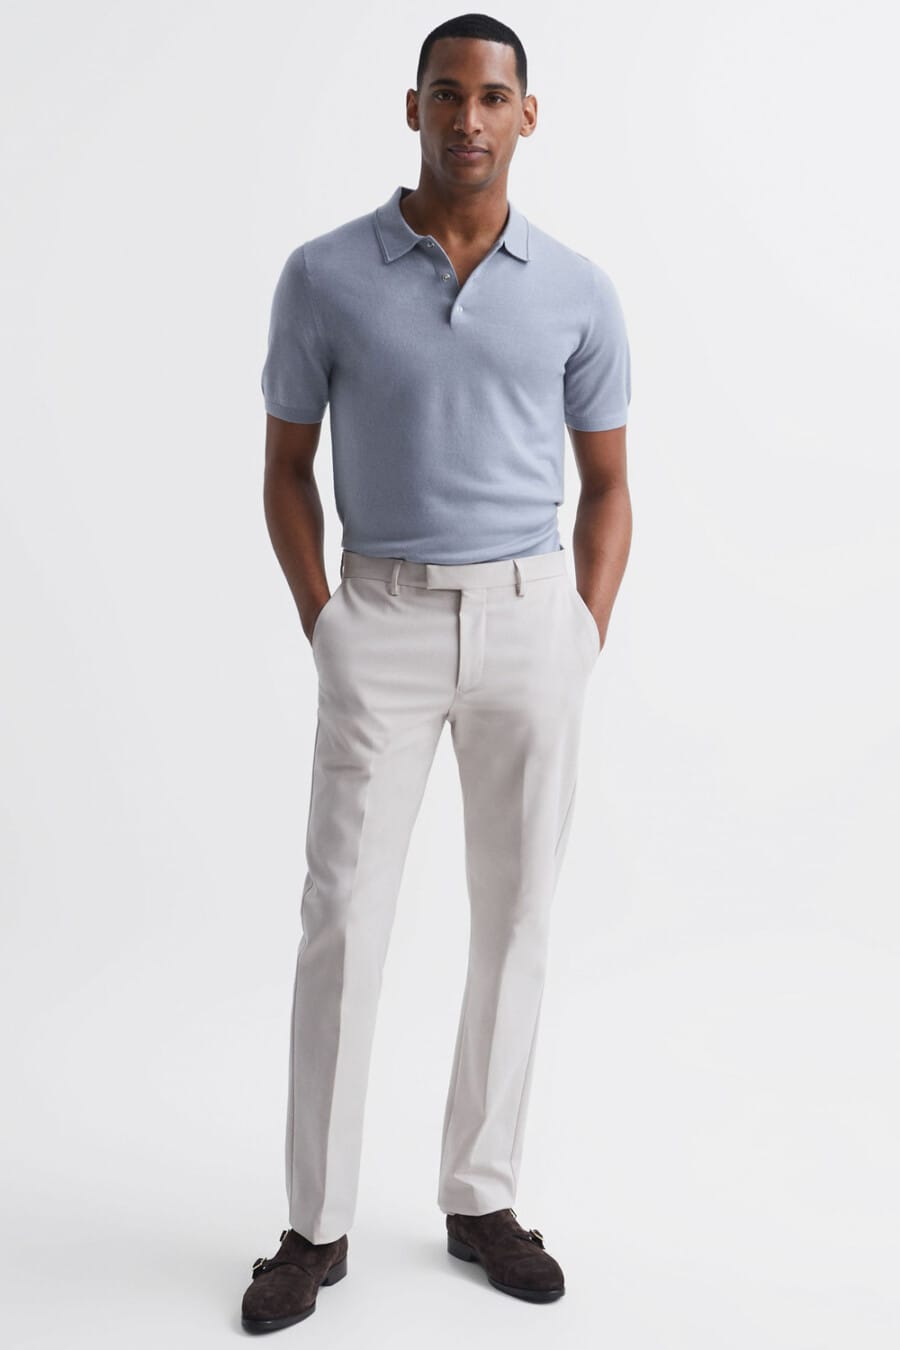 Men's light grey tailored pants, light blue knitted polo shirt and brown double monk-strap shoes outfit